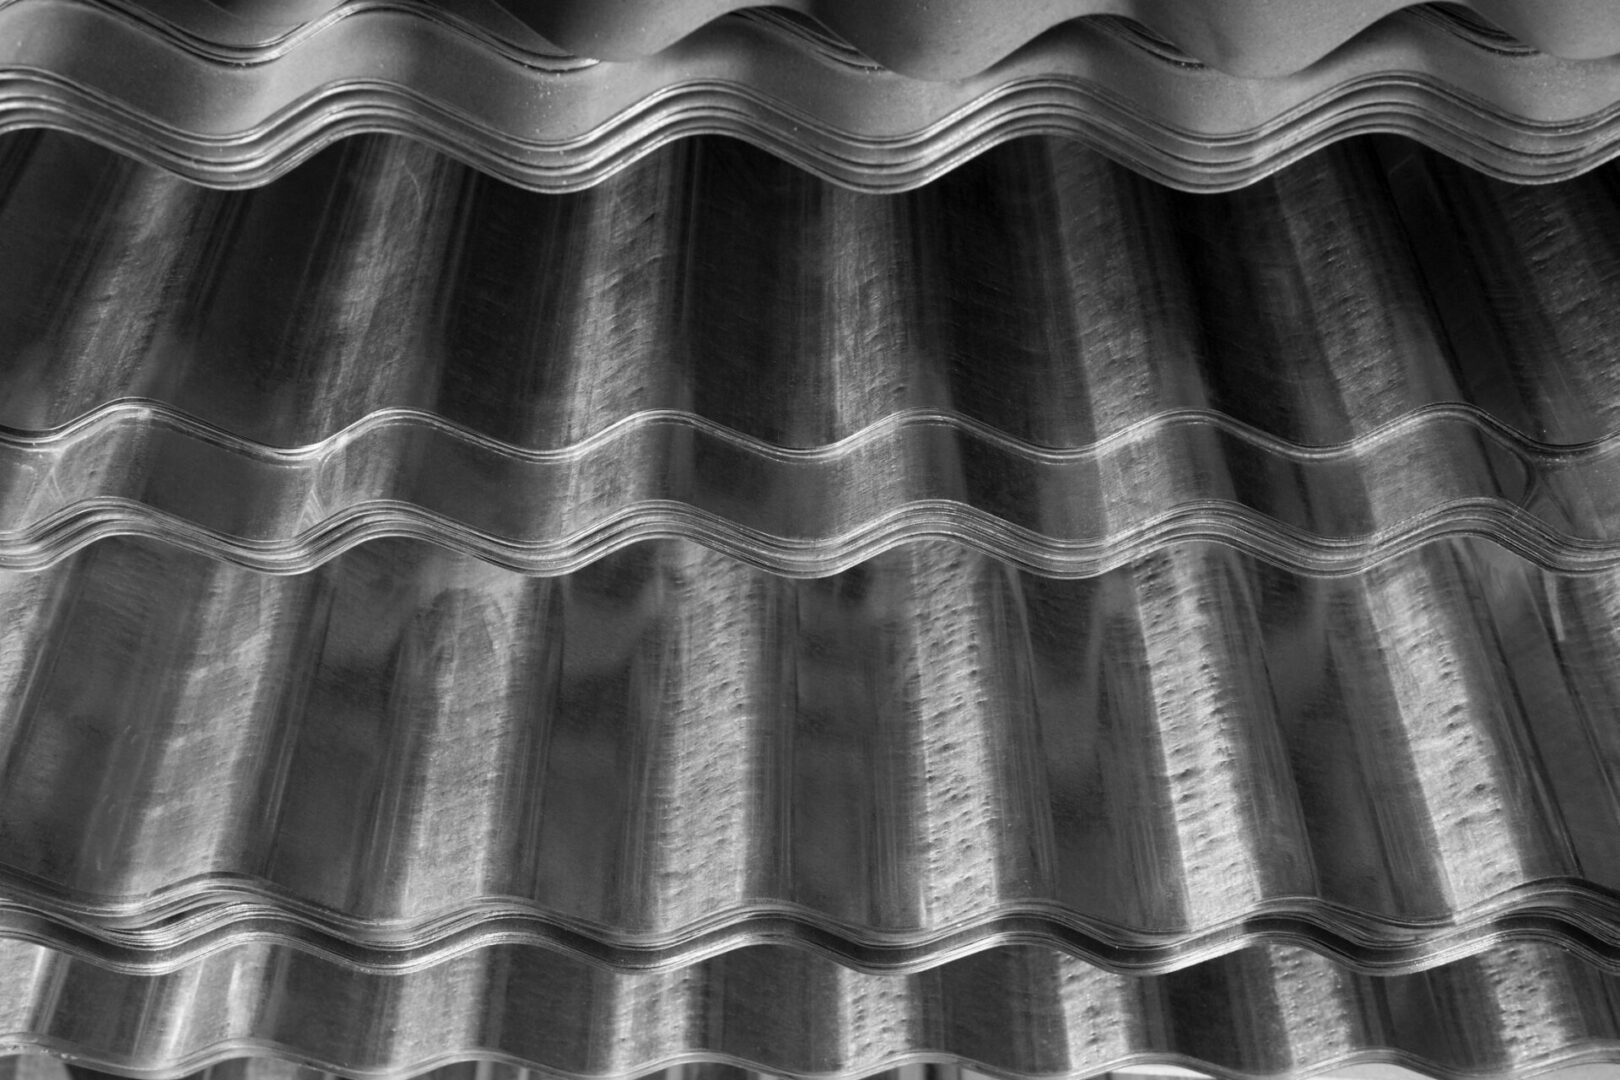 A black and white photo of some wavy metal sheets.